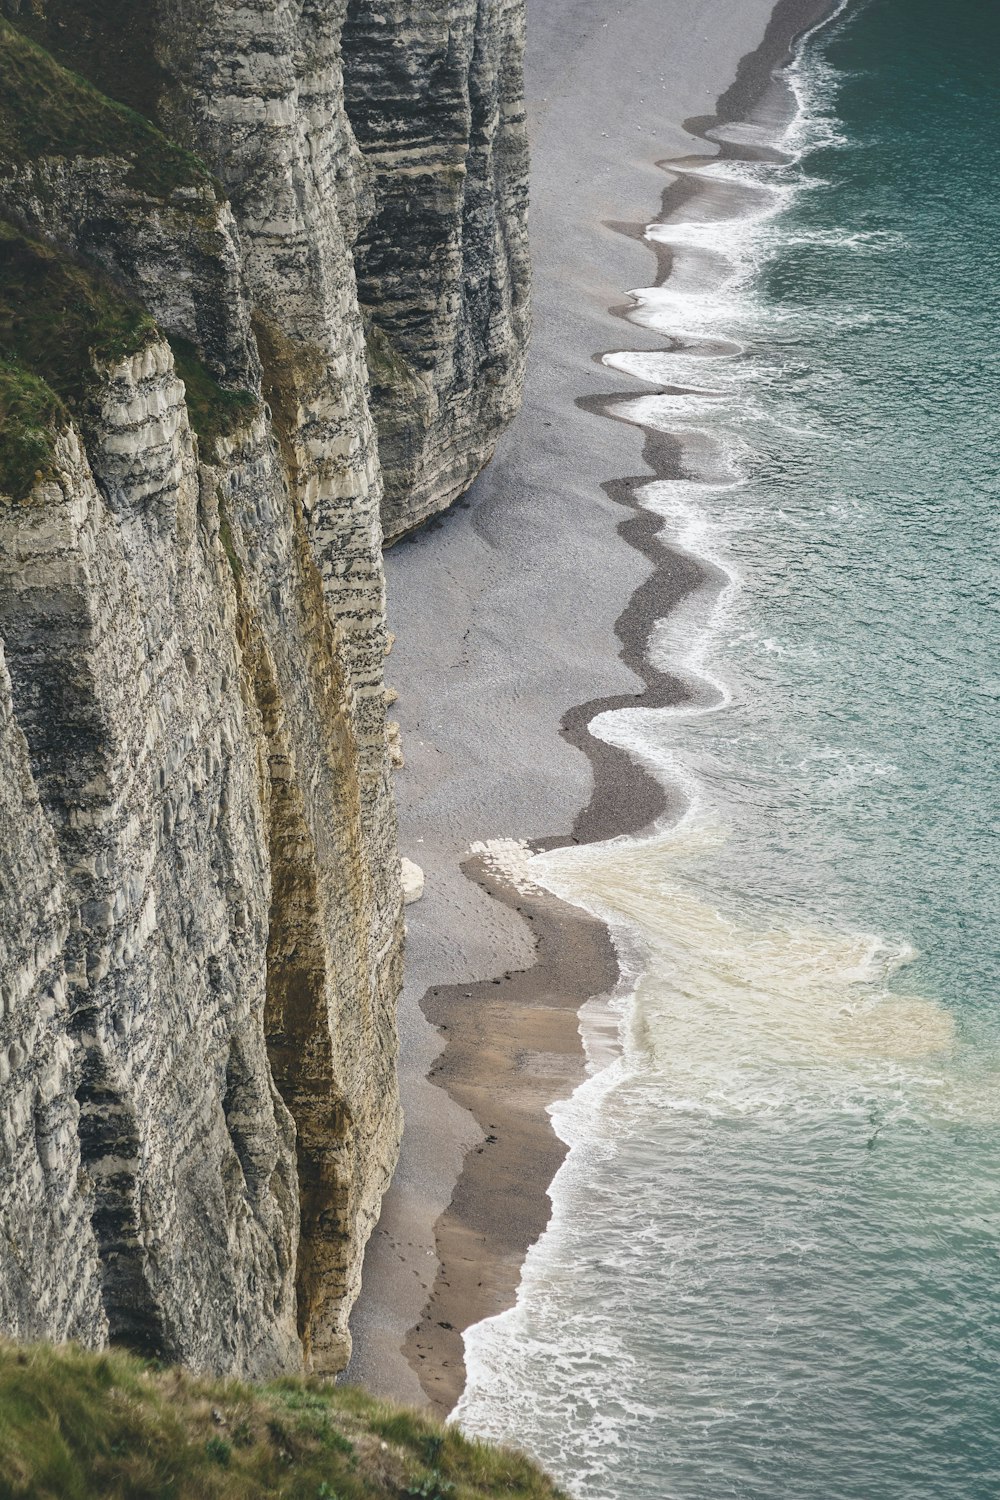 sea waves crushing to shore near rock formation